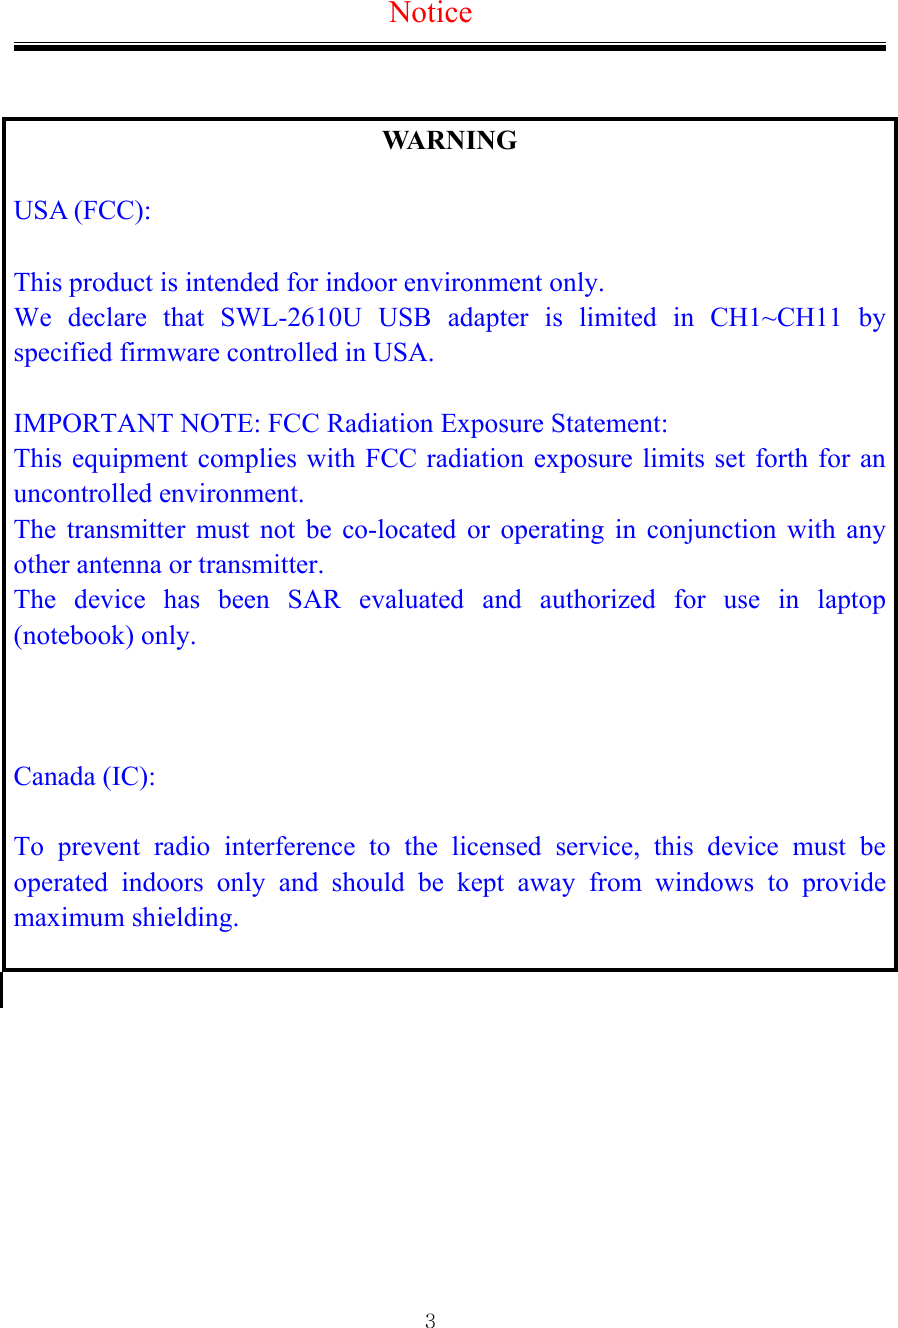  3Notice   WARNING  USA (FCC):  This product is intended for indoor environment only.   We declare that SWL-2610U USB adapter is limited in CH1~CH11 by specified firmware controlled in USA.  IMPORTANT NOTE: FCC Radiation Exposure Statement: This equipment complies with FCC radiation exposure limits set forth for an uncontrolled environment.   The transmitter must not be co-located or operating in conjunction with any other antenna or transmitter.   The device has been SAR evaluated and authorized for use in laptop (notebook) only.    Canada (IC):  To prevent radio interference to the licensed service, this device must be operated indoors only and should be kept away from windows to provide maximum shielding.          